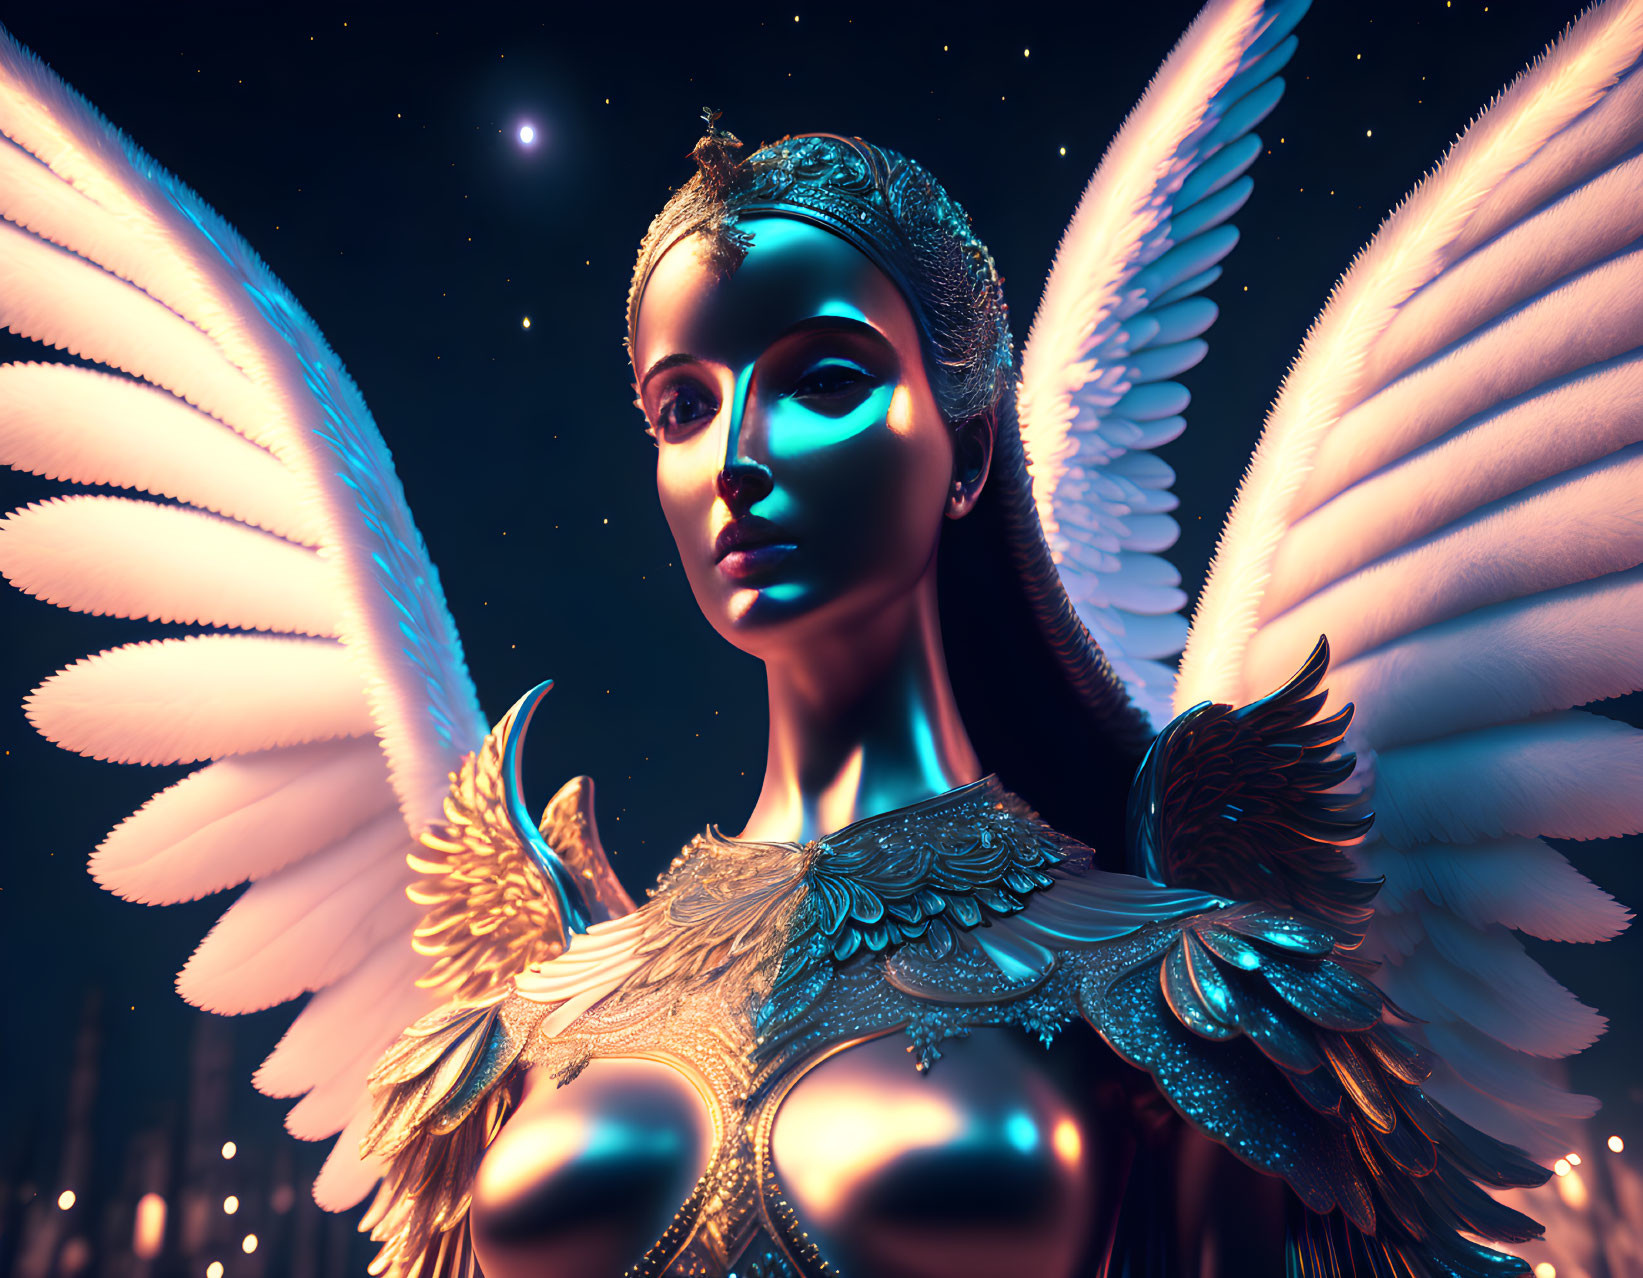 Detailed 3D humanoid figure with glowing skin and wings in golden armor